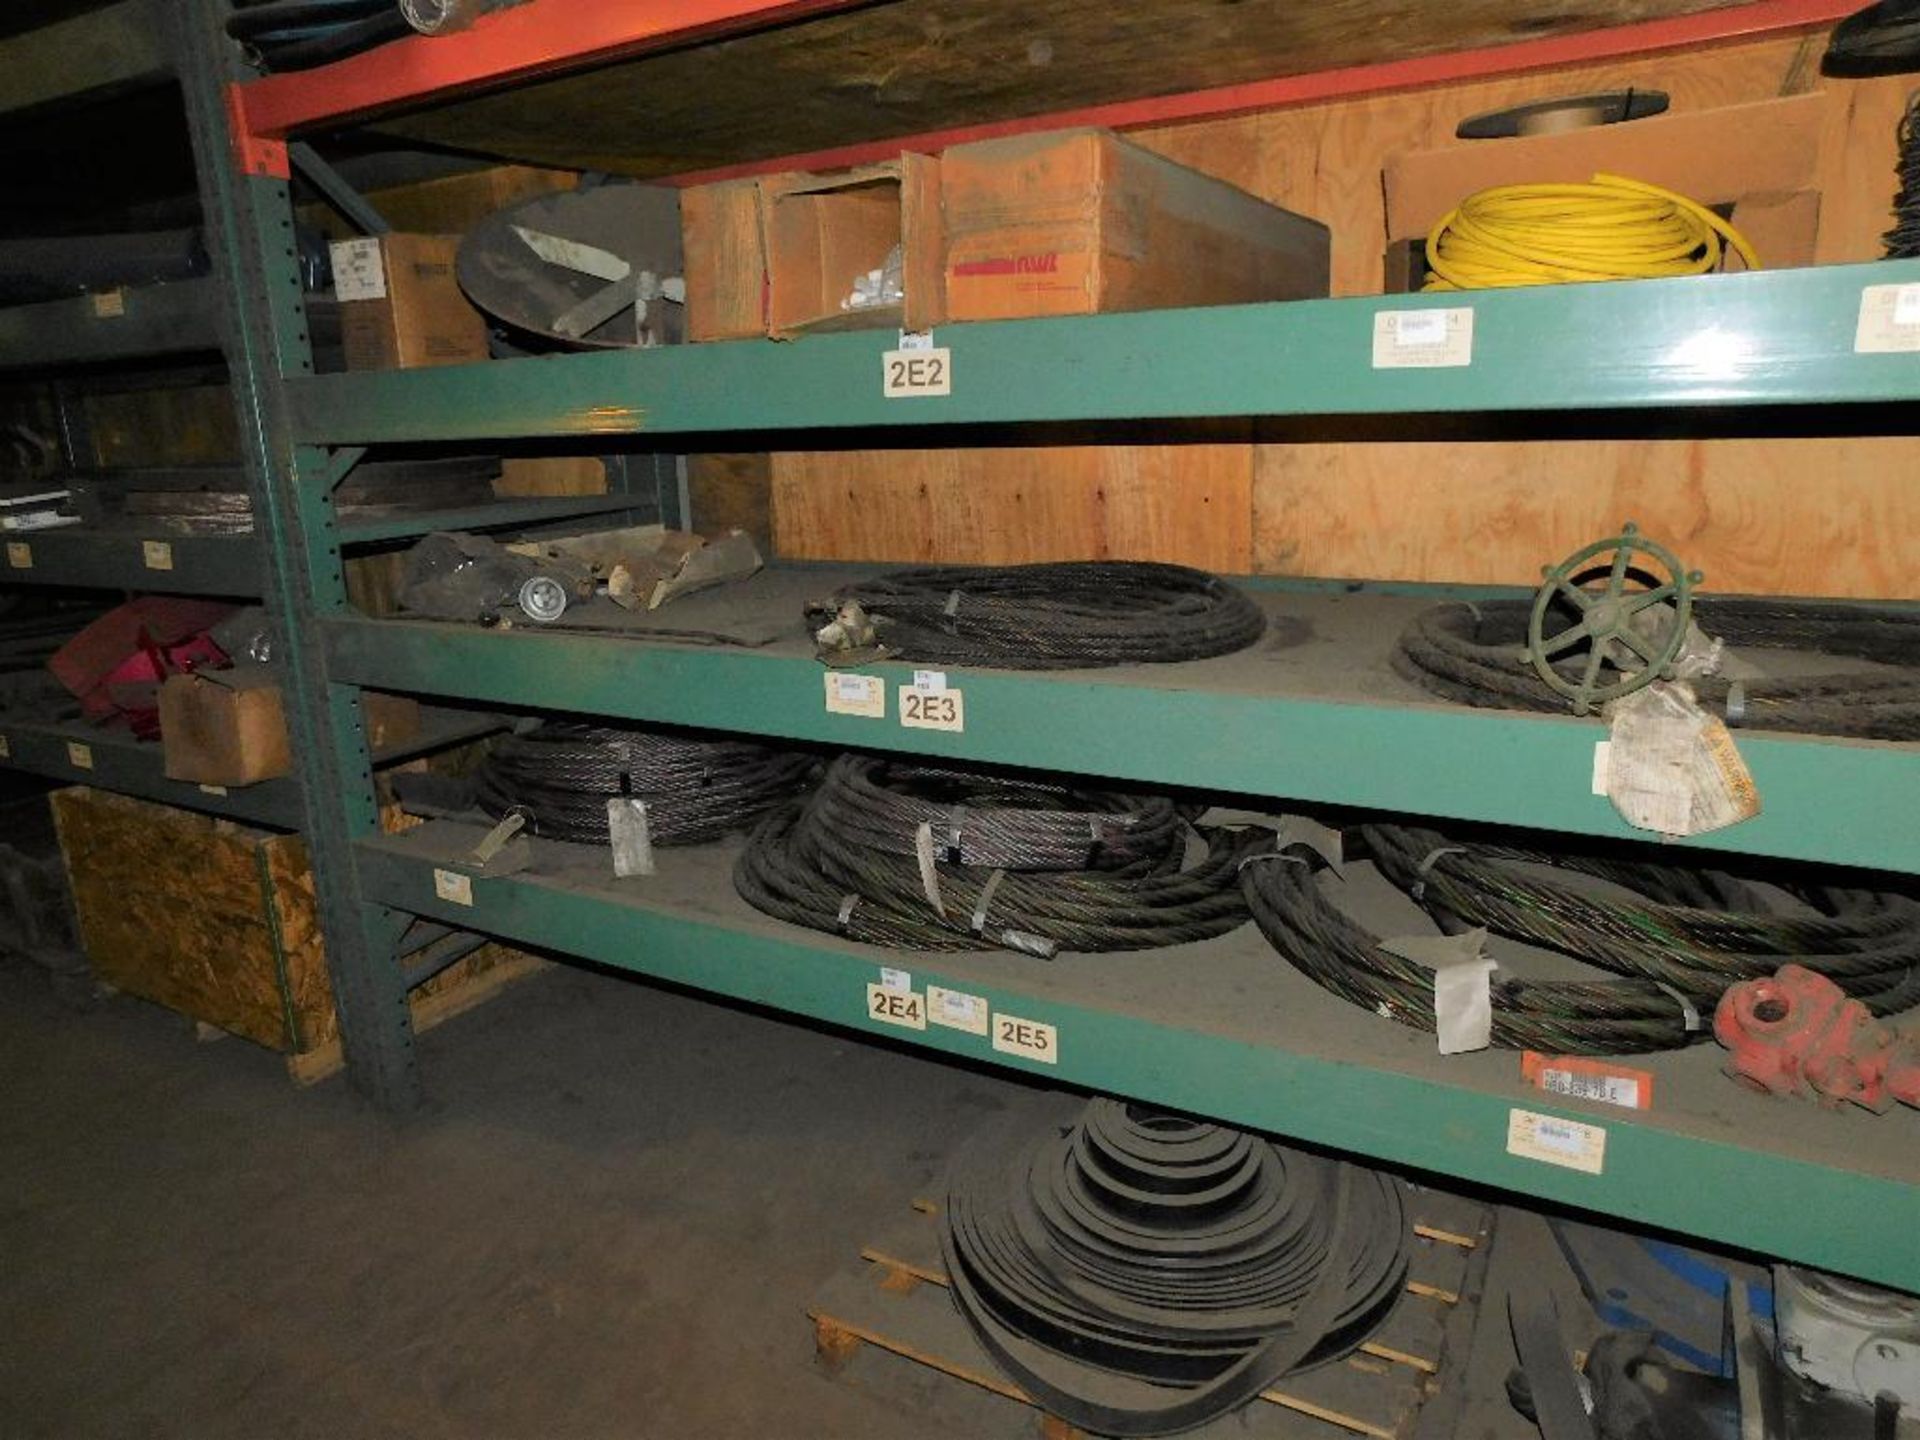 Assortes (2) Ros 8' Pallet Rack with Contents of Conveyor and Pump Parts. - Image 3 of 5